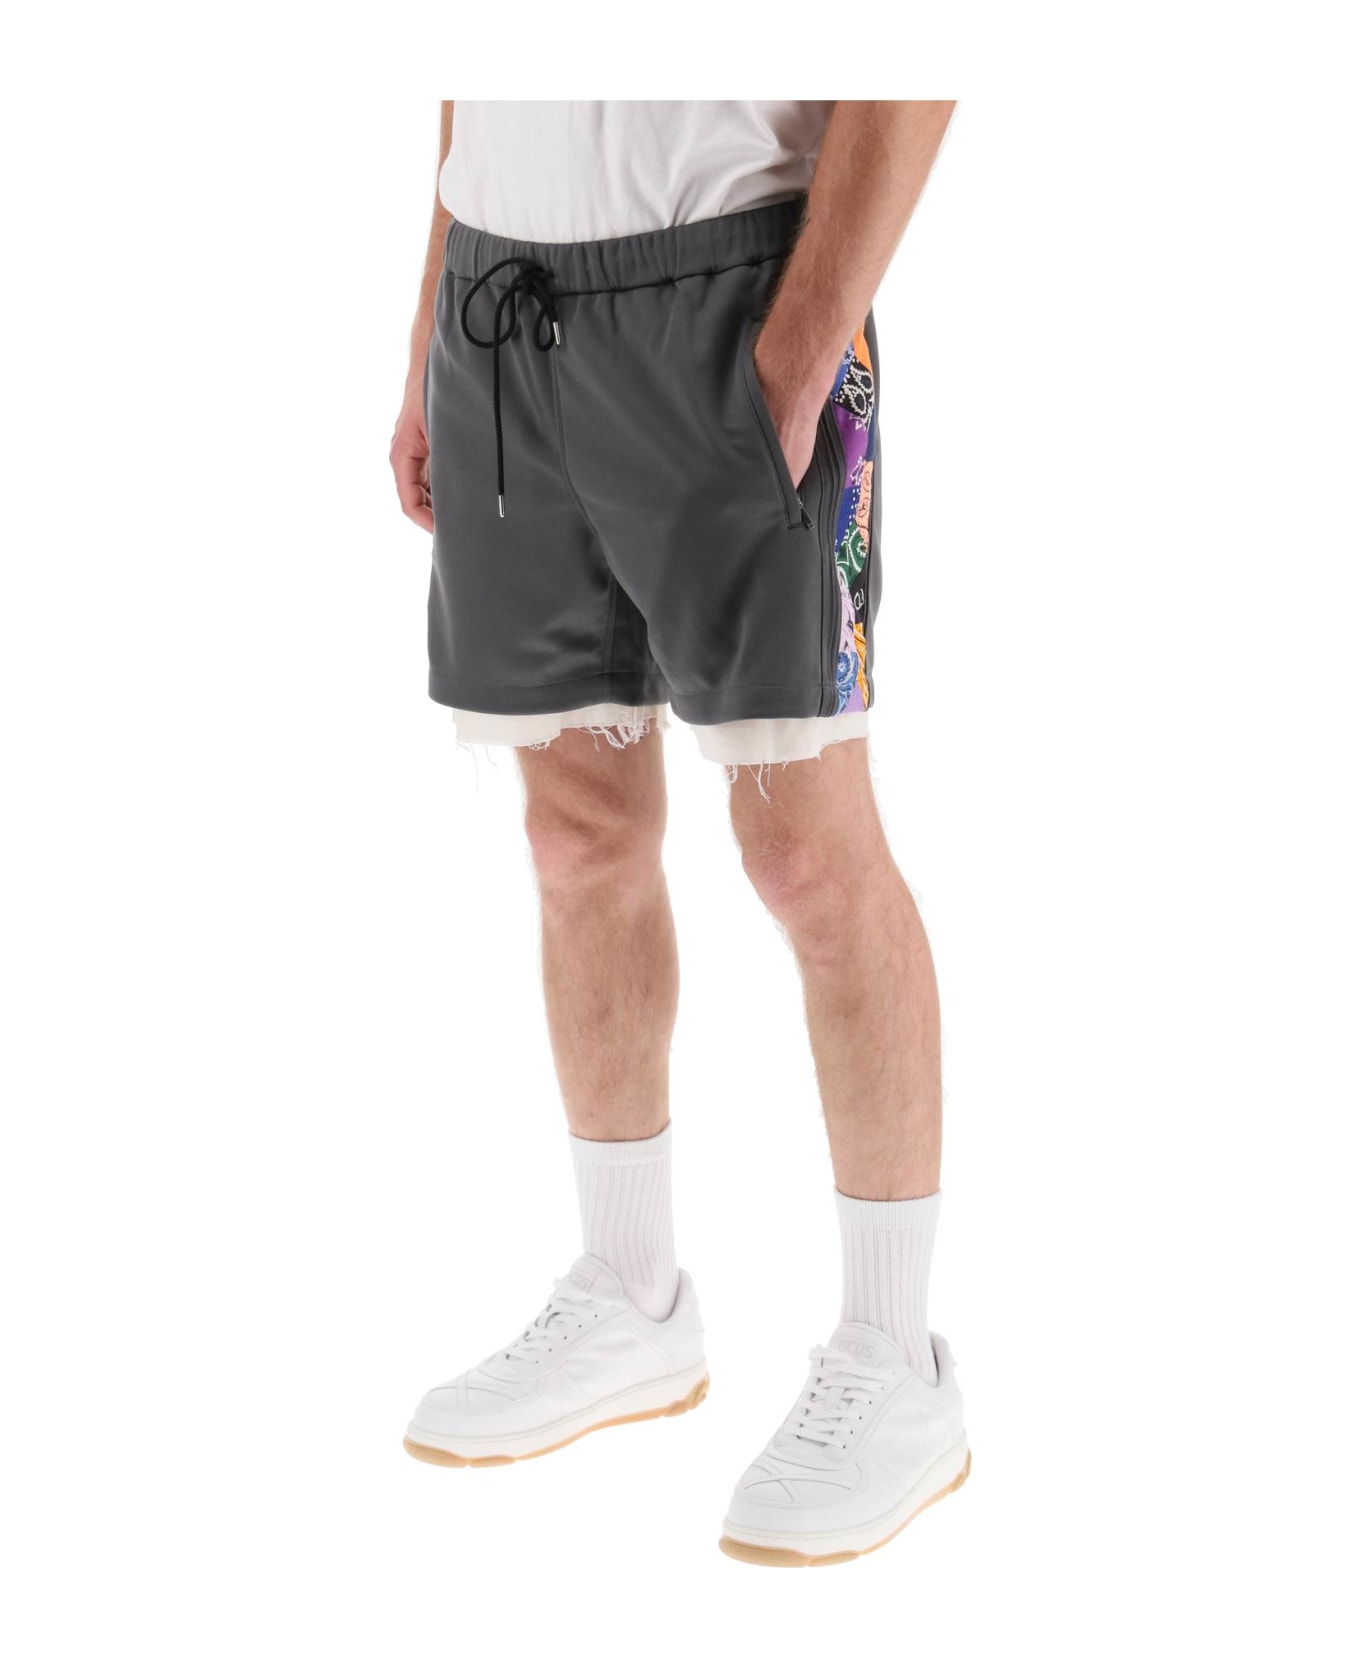 Children of the Discordance Jersey Shorts With Bandana Bands - GRAY (Grey)